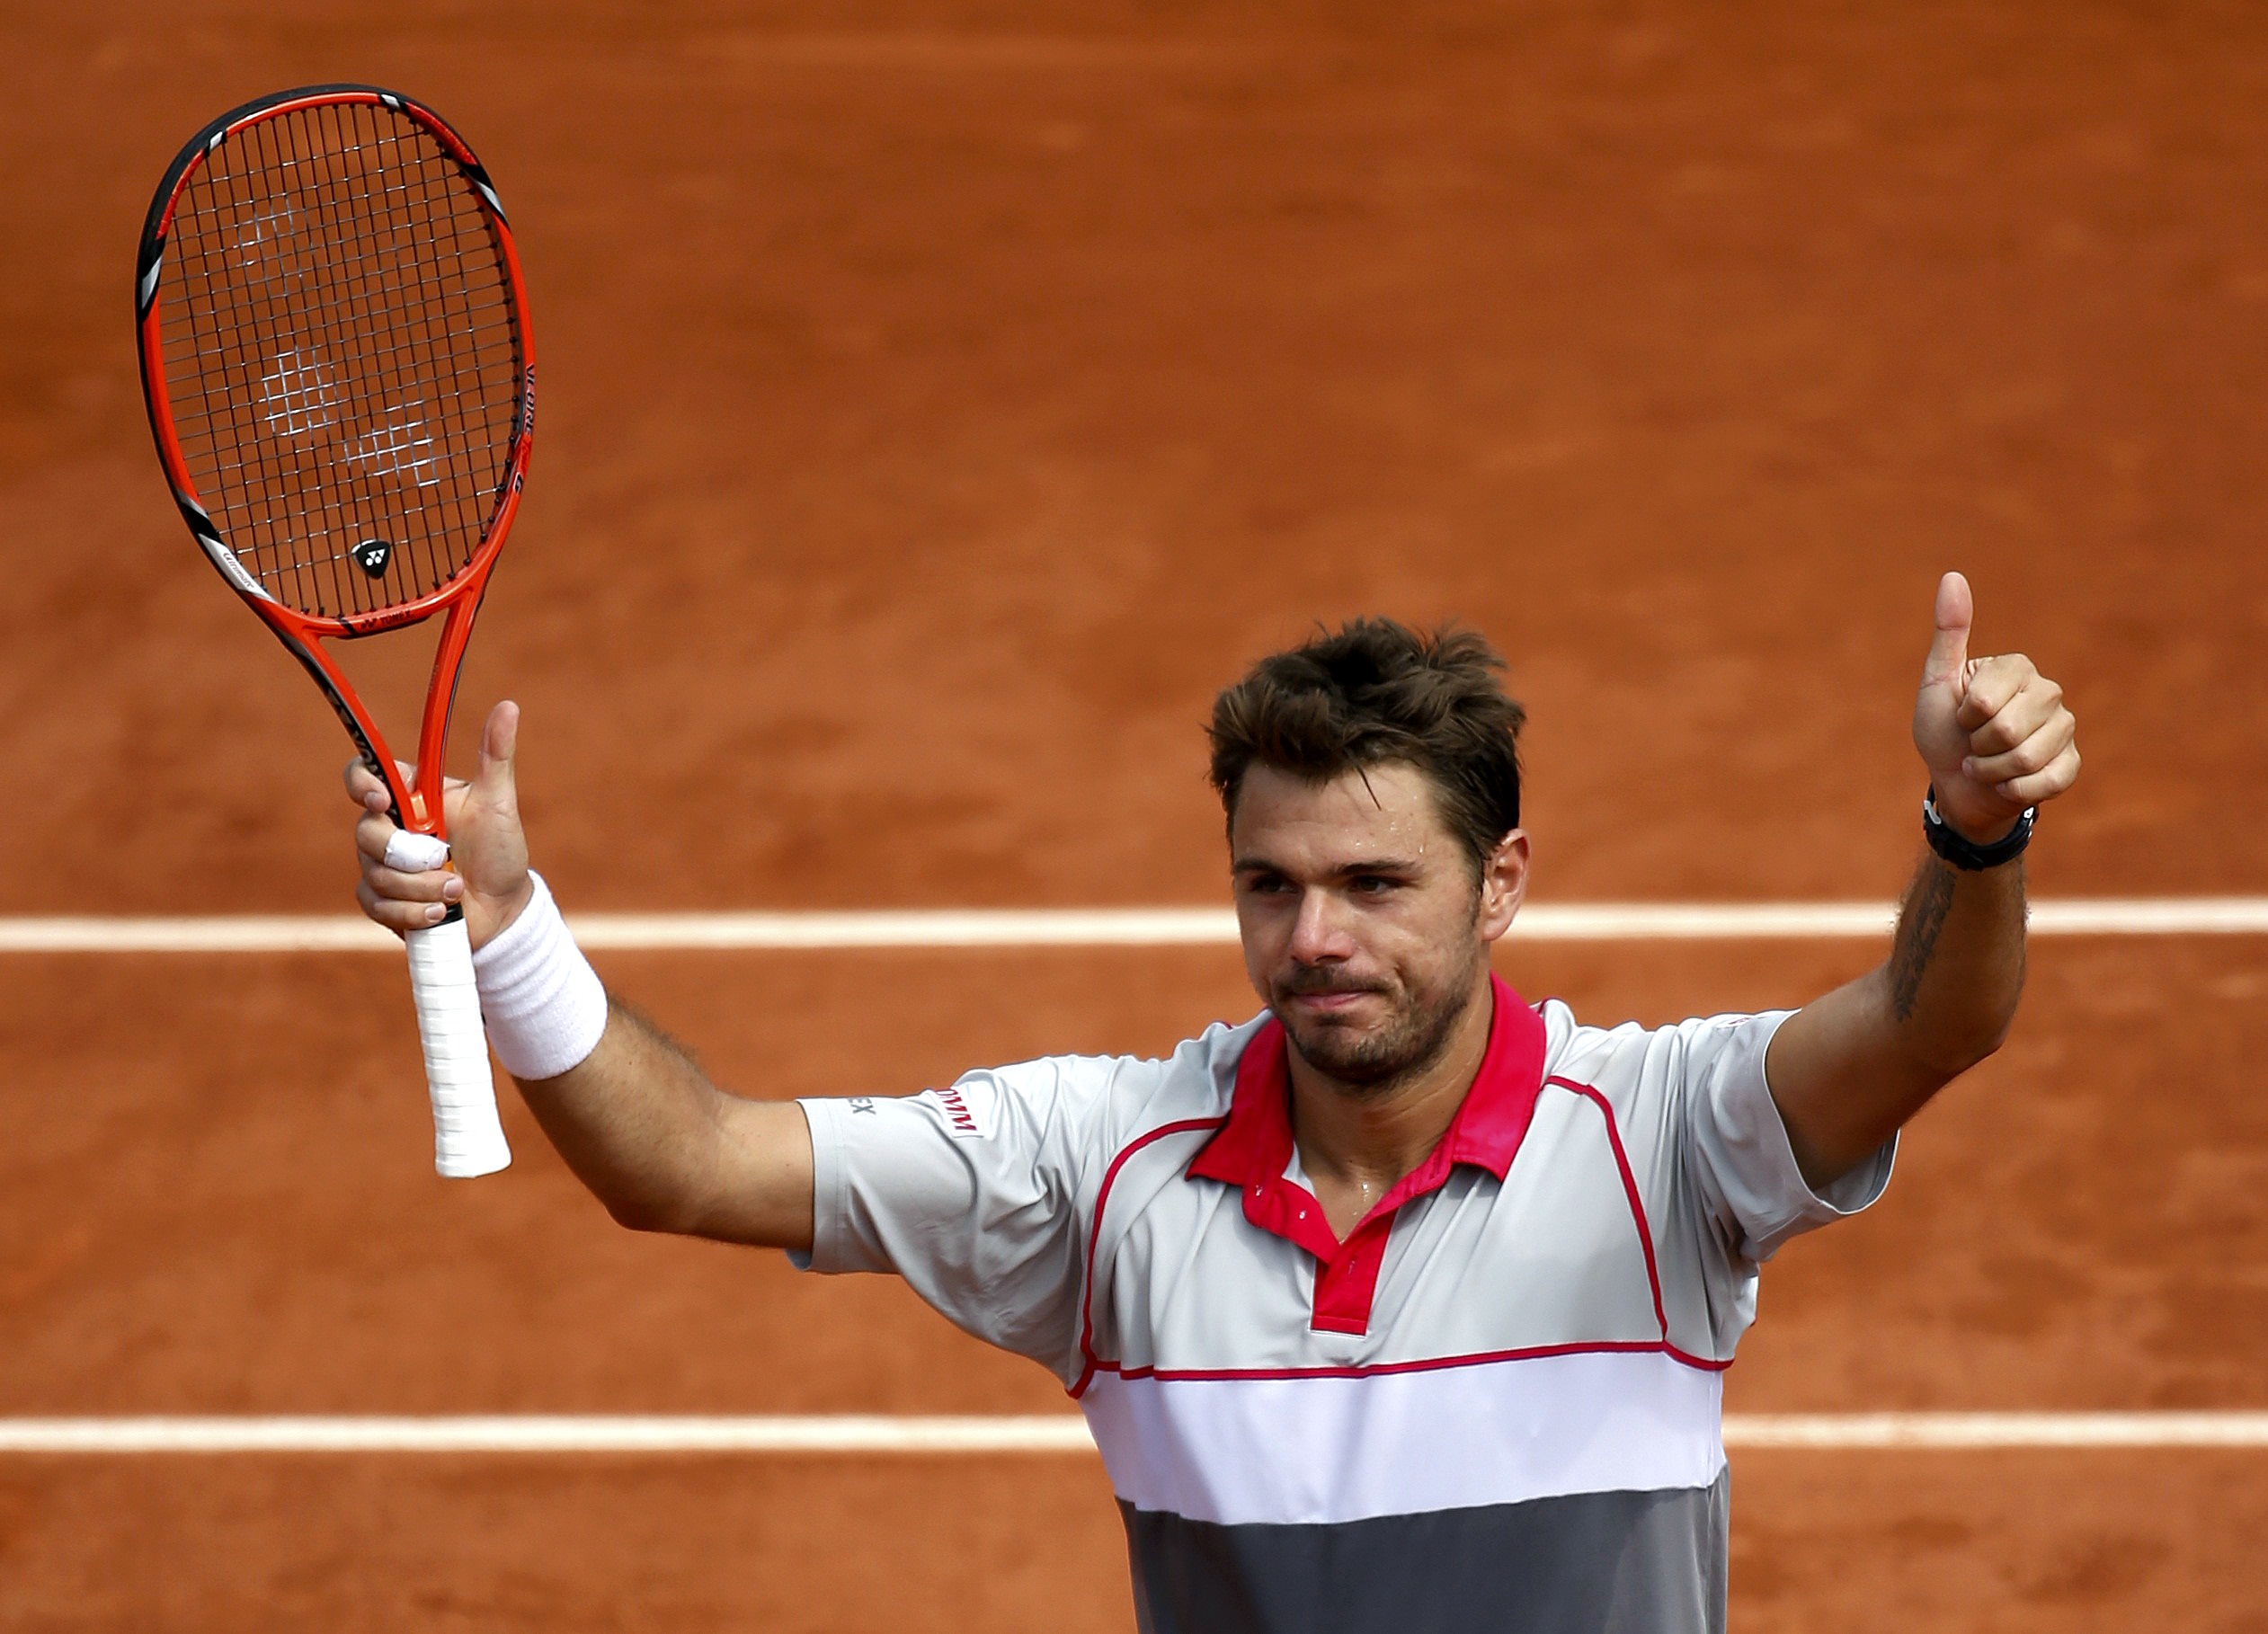 Stan Wawrinka of Switzerland celebrates after beating Steve Johnson of the U.S. during their men's singles match at the French Open tennis tournament at the Roland Garros stadium in Paris, France, May 29, 2015. REUTERS/Vincent Kessler